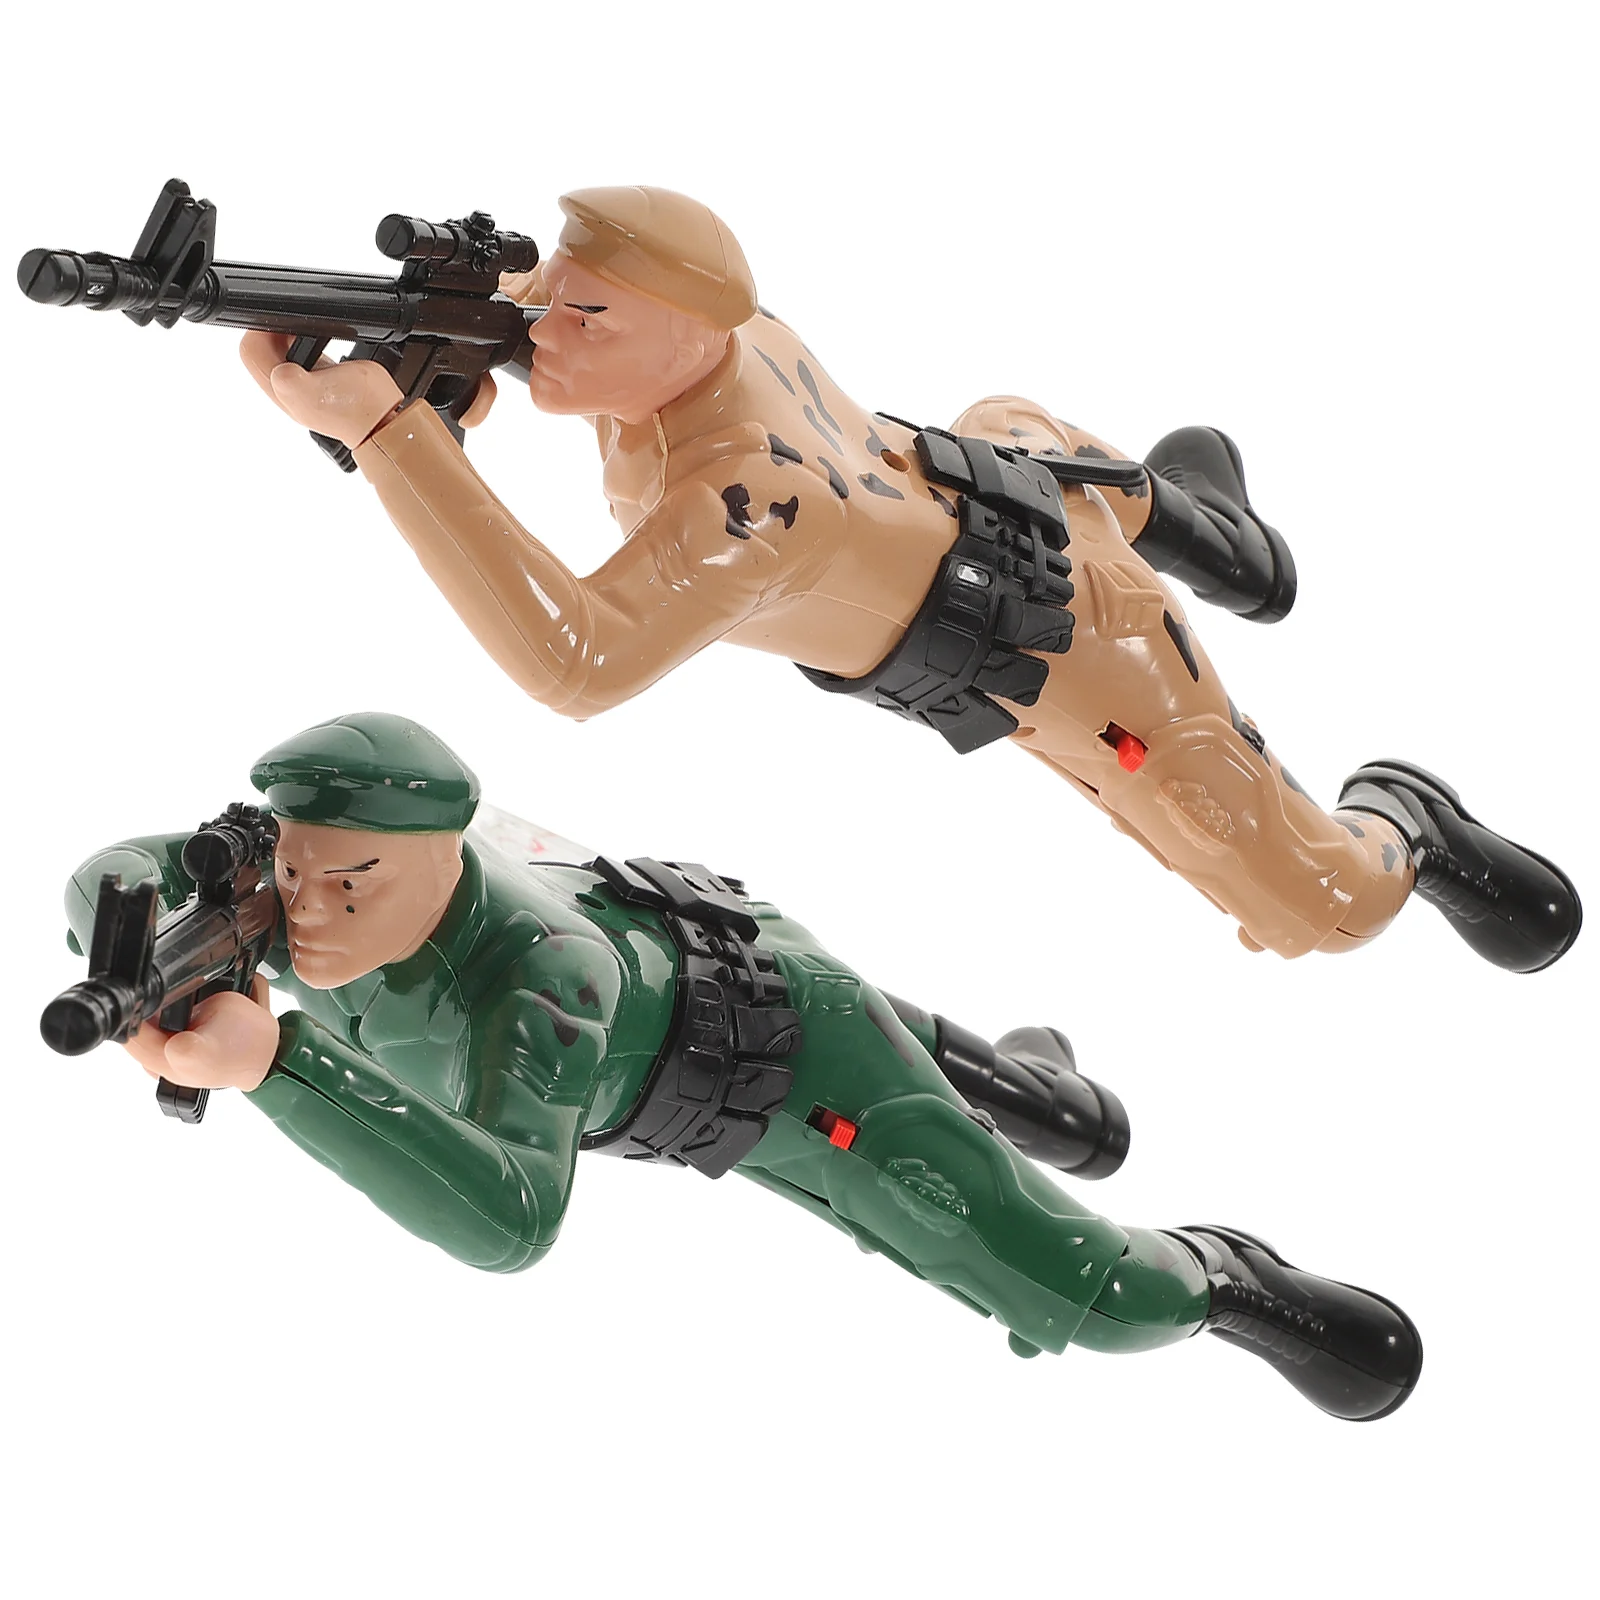 

2 Pcs Soldier Toy Crawling Toys Electric Number Children Soldiers Toddler Plastic Kids Educational Playthings Man